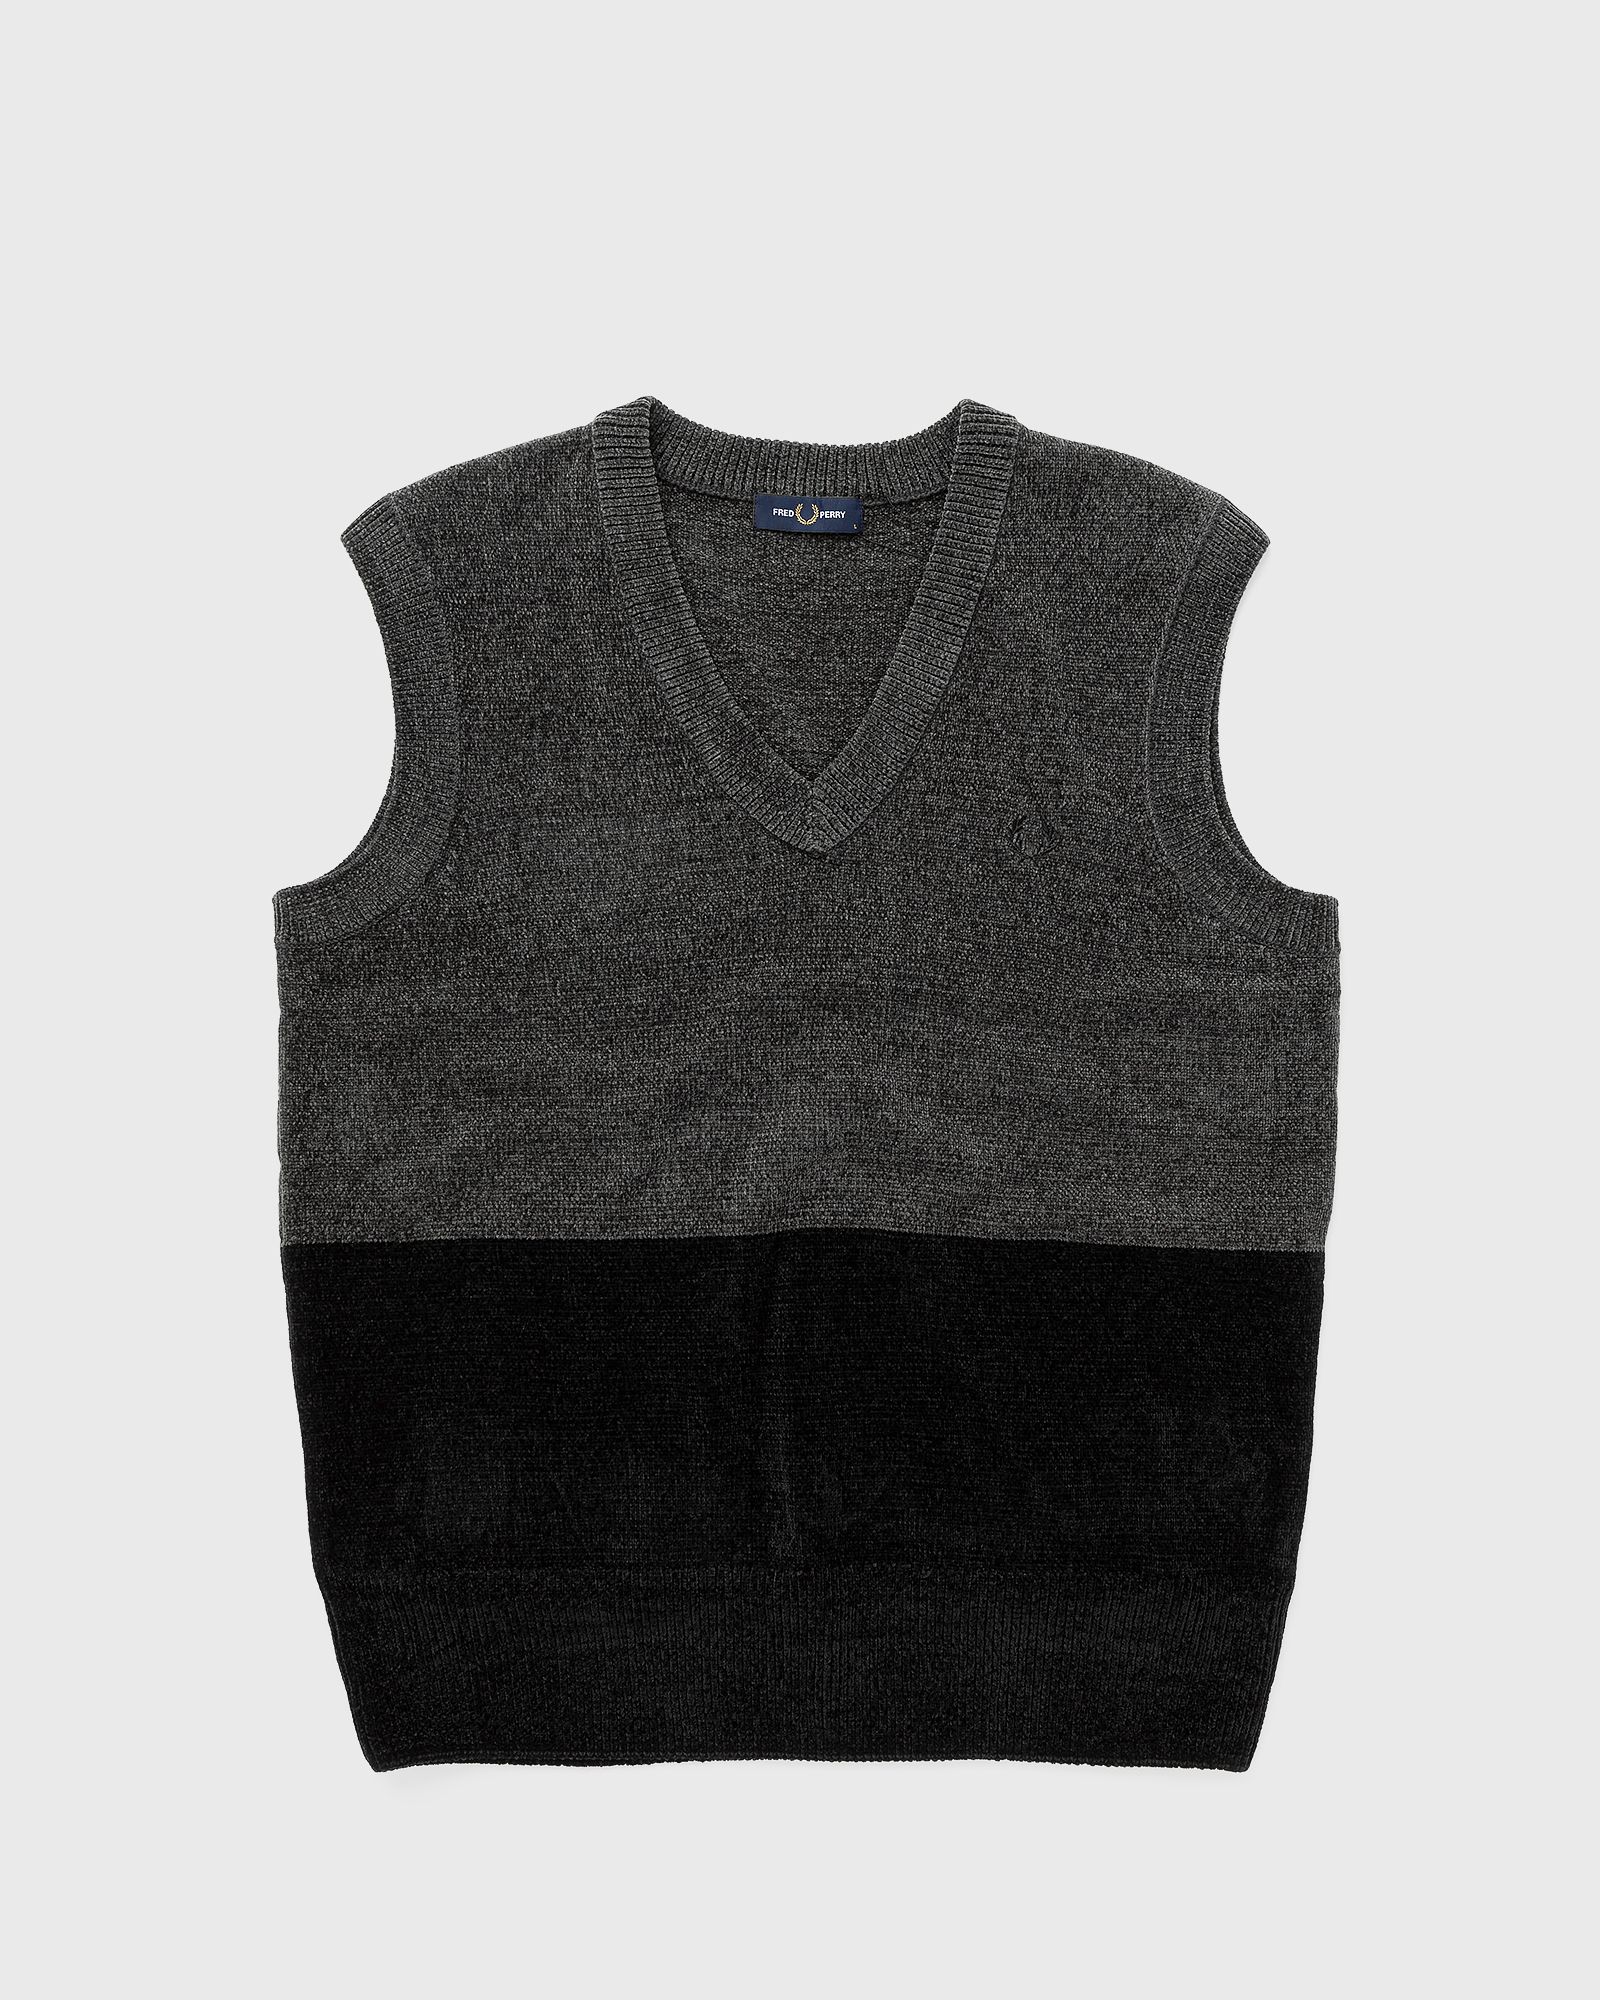 Fred Perry Colourblock Chenille Tank men Vests black|grey in Größe:L von Fred Perry